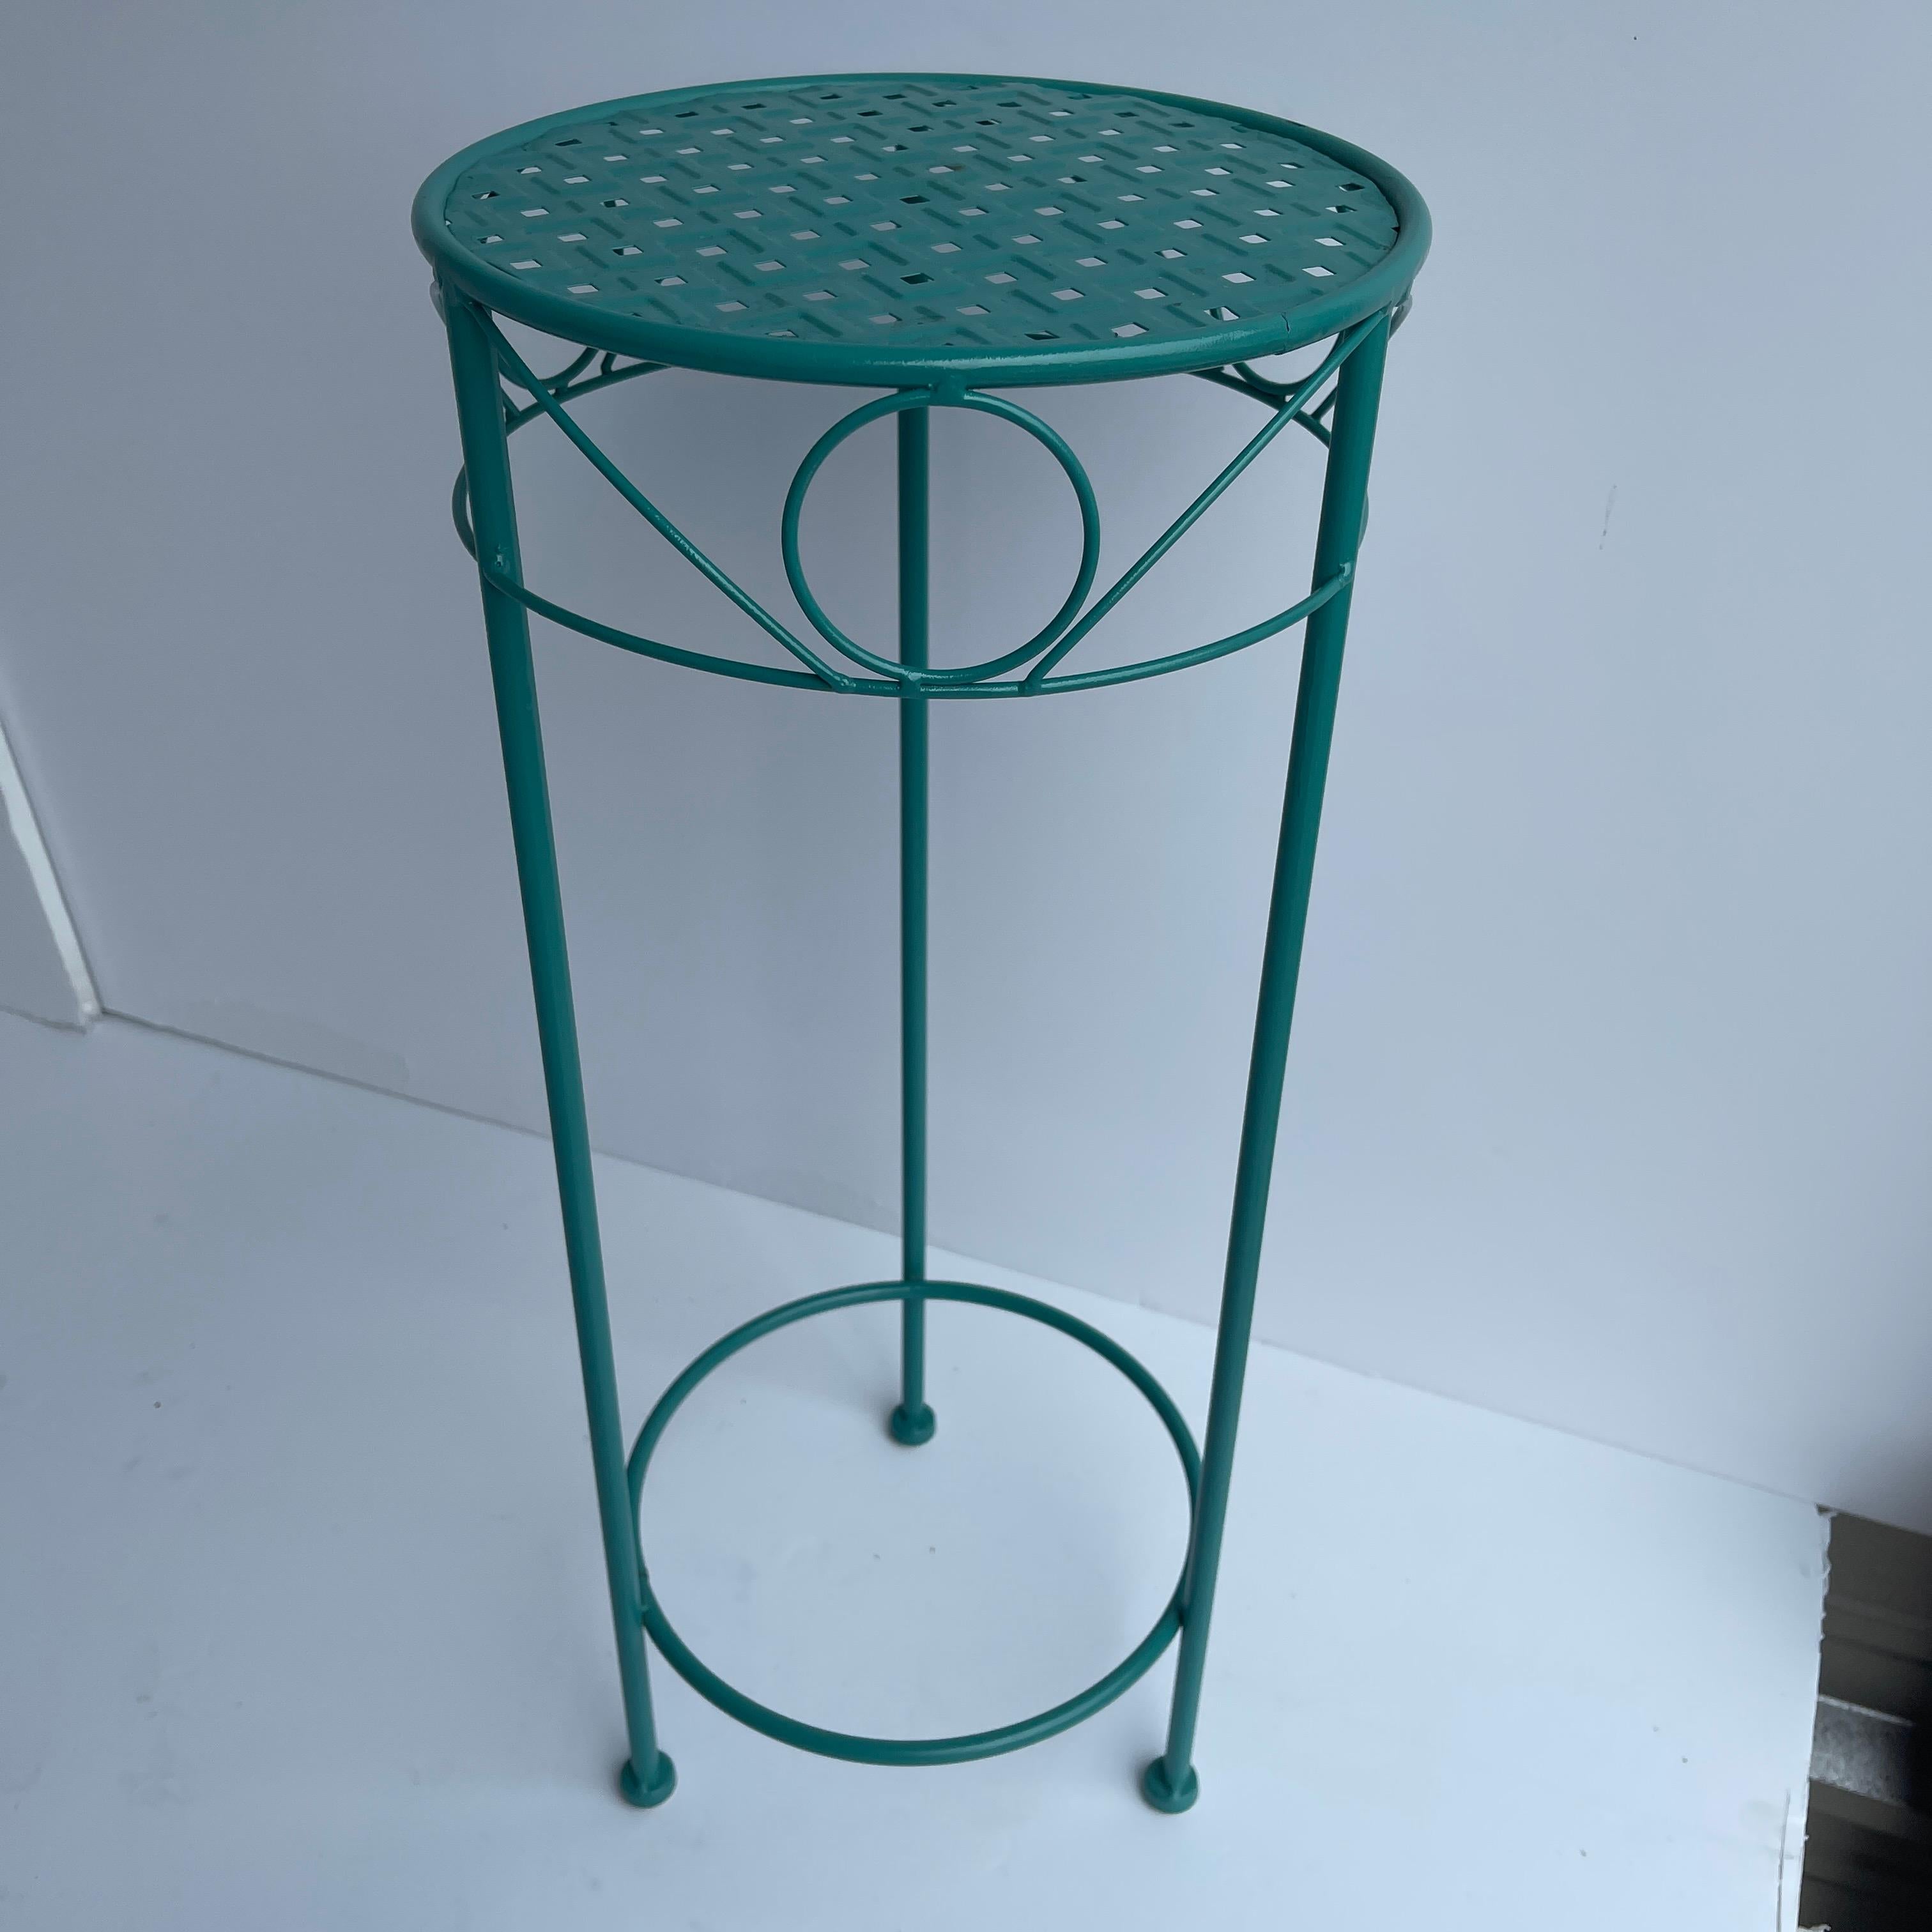 Mid-Century Modern metal plant stand. Turquoise powder coated plant stand or pedestal table. This small plant stand is looking good in fresh soft turquoise. Ready to grace any area of your home, garden or patio, the turquoise color is perfect